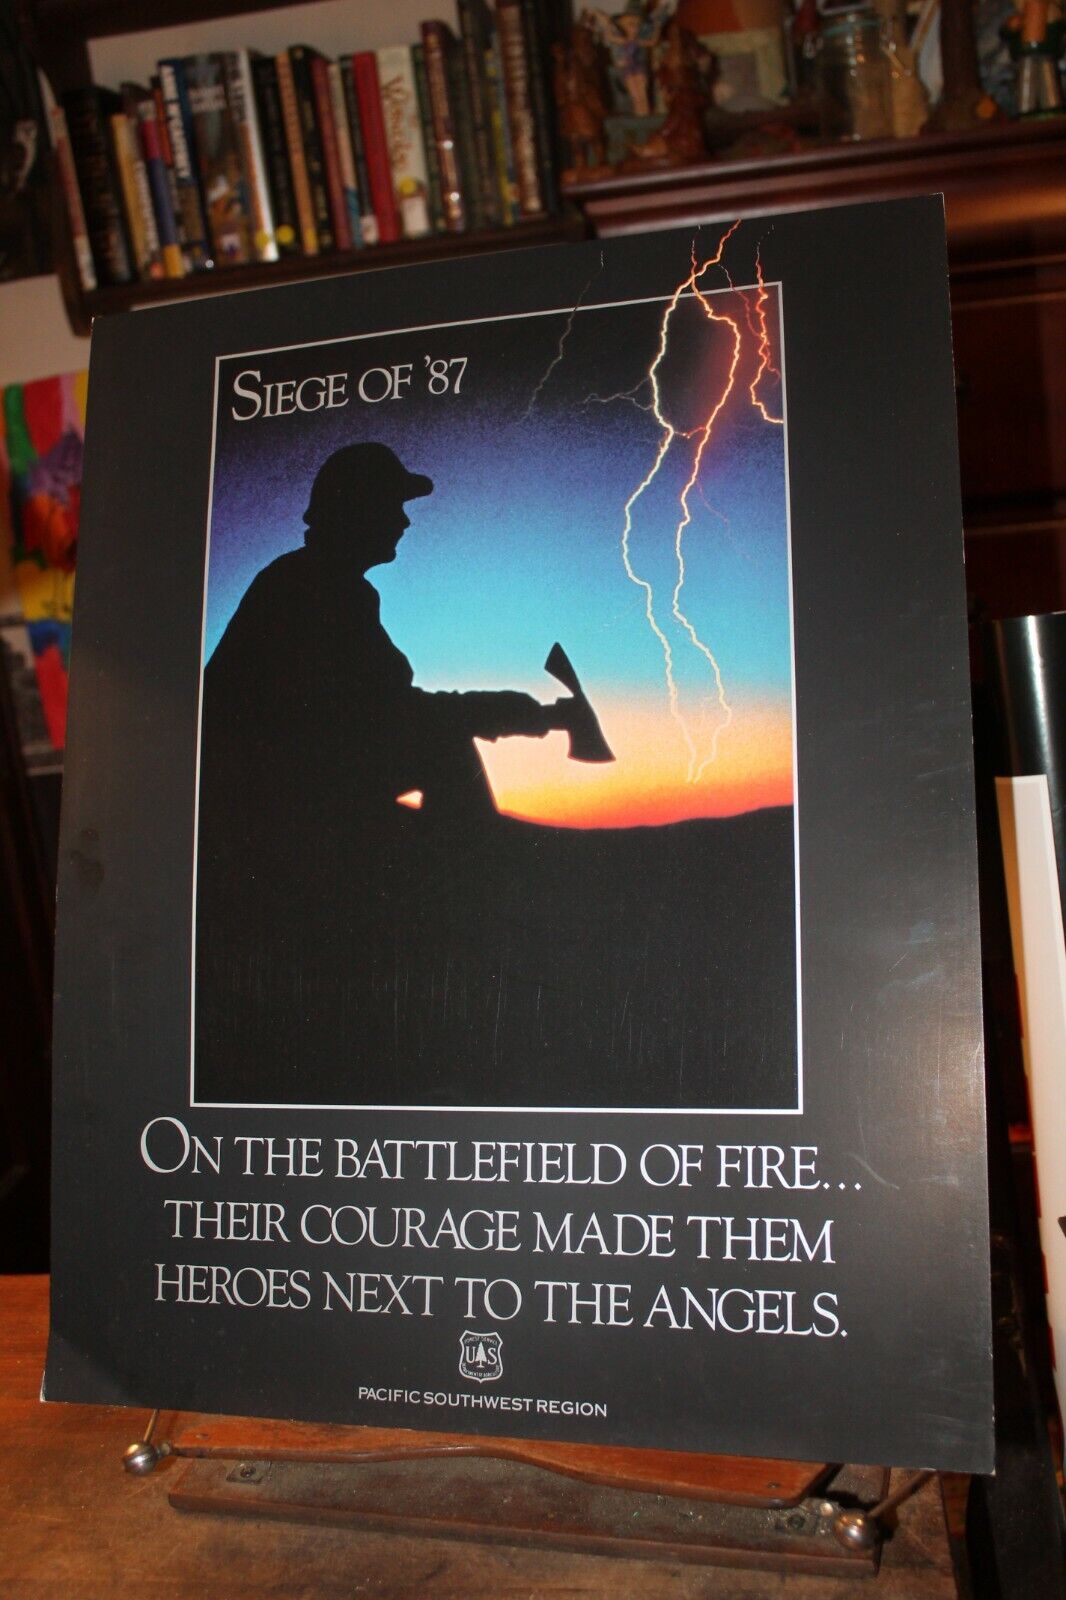 1987 USDA Forest Service Siege of \'87 Firefighters Fire Poster Pacific Southwest